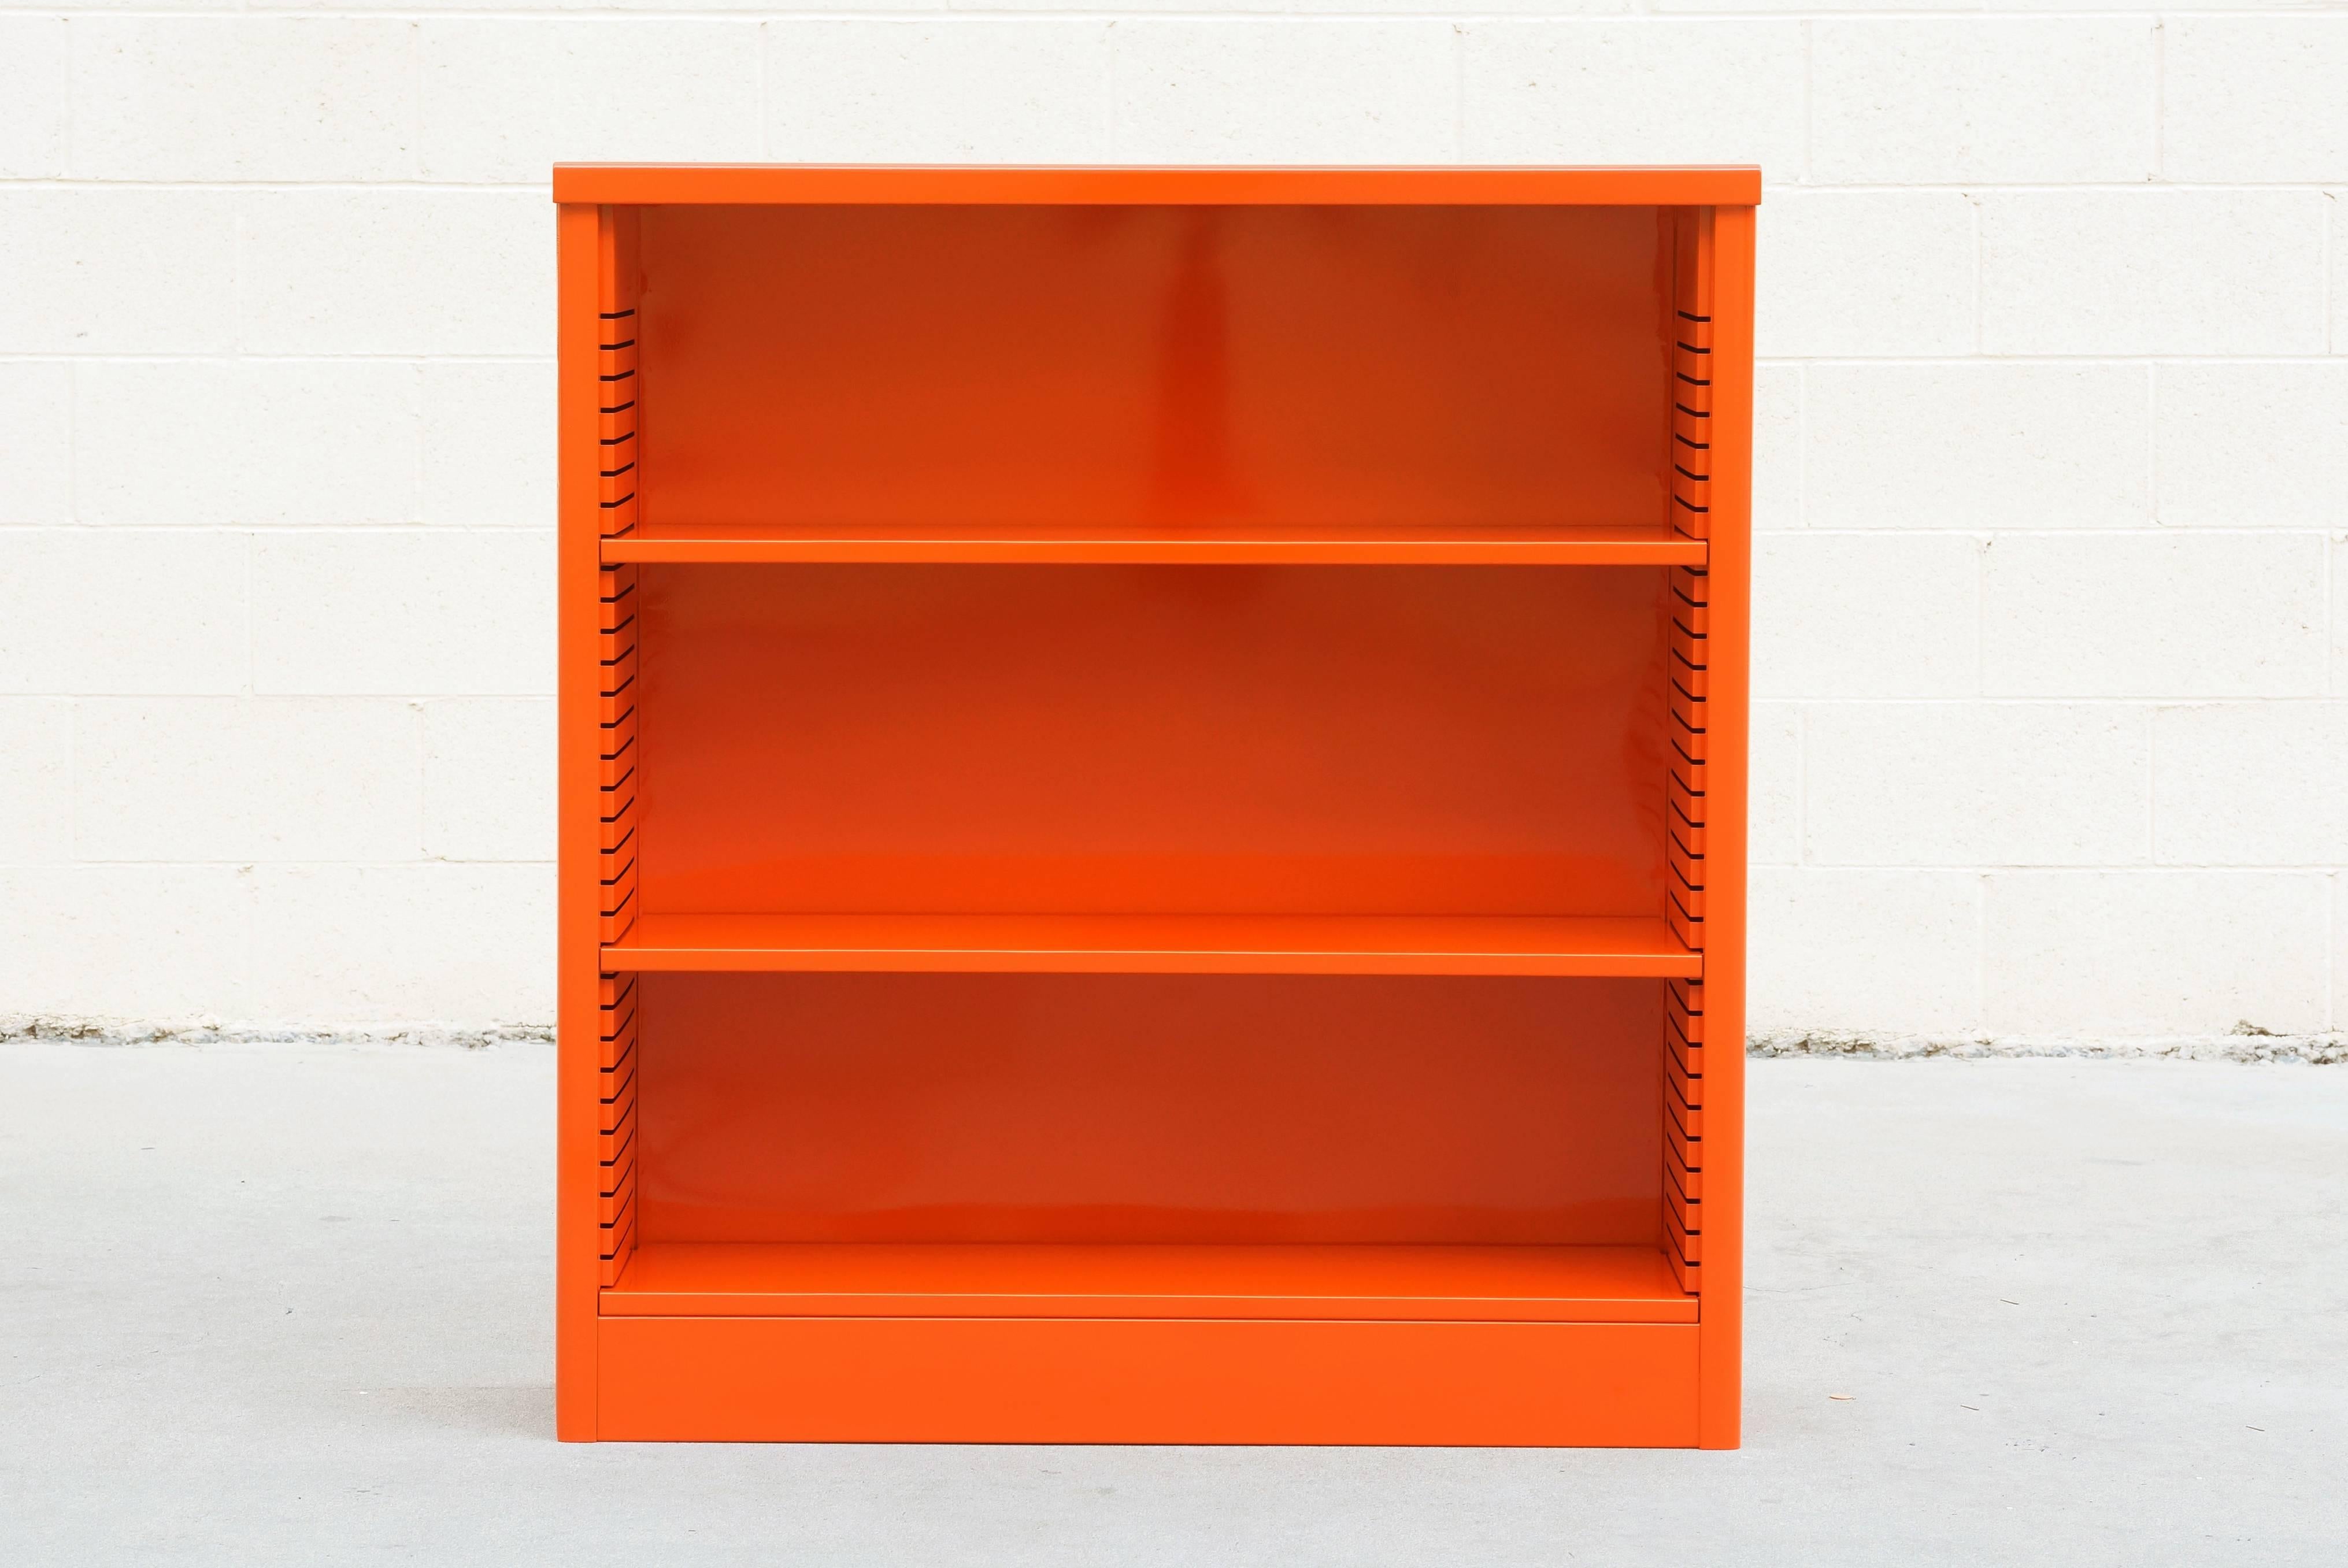 Neat 1960s tanker style steel bookcase freshly powder coated in high gloss orange. Originally used in the UCLA math department, this adjustable three-shelf unit is an excellent storage option– its sleek and compact, yet holds many books. It's